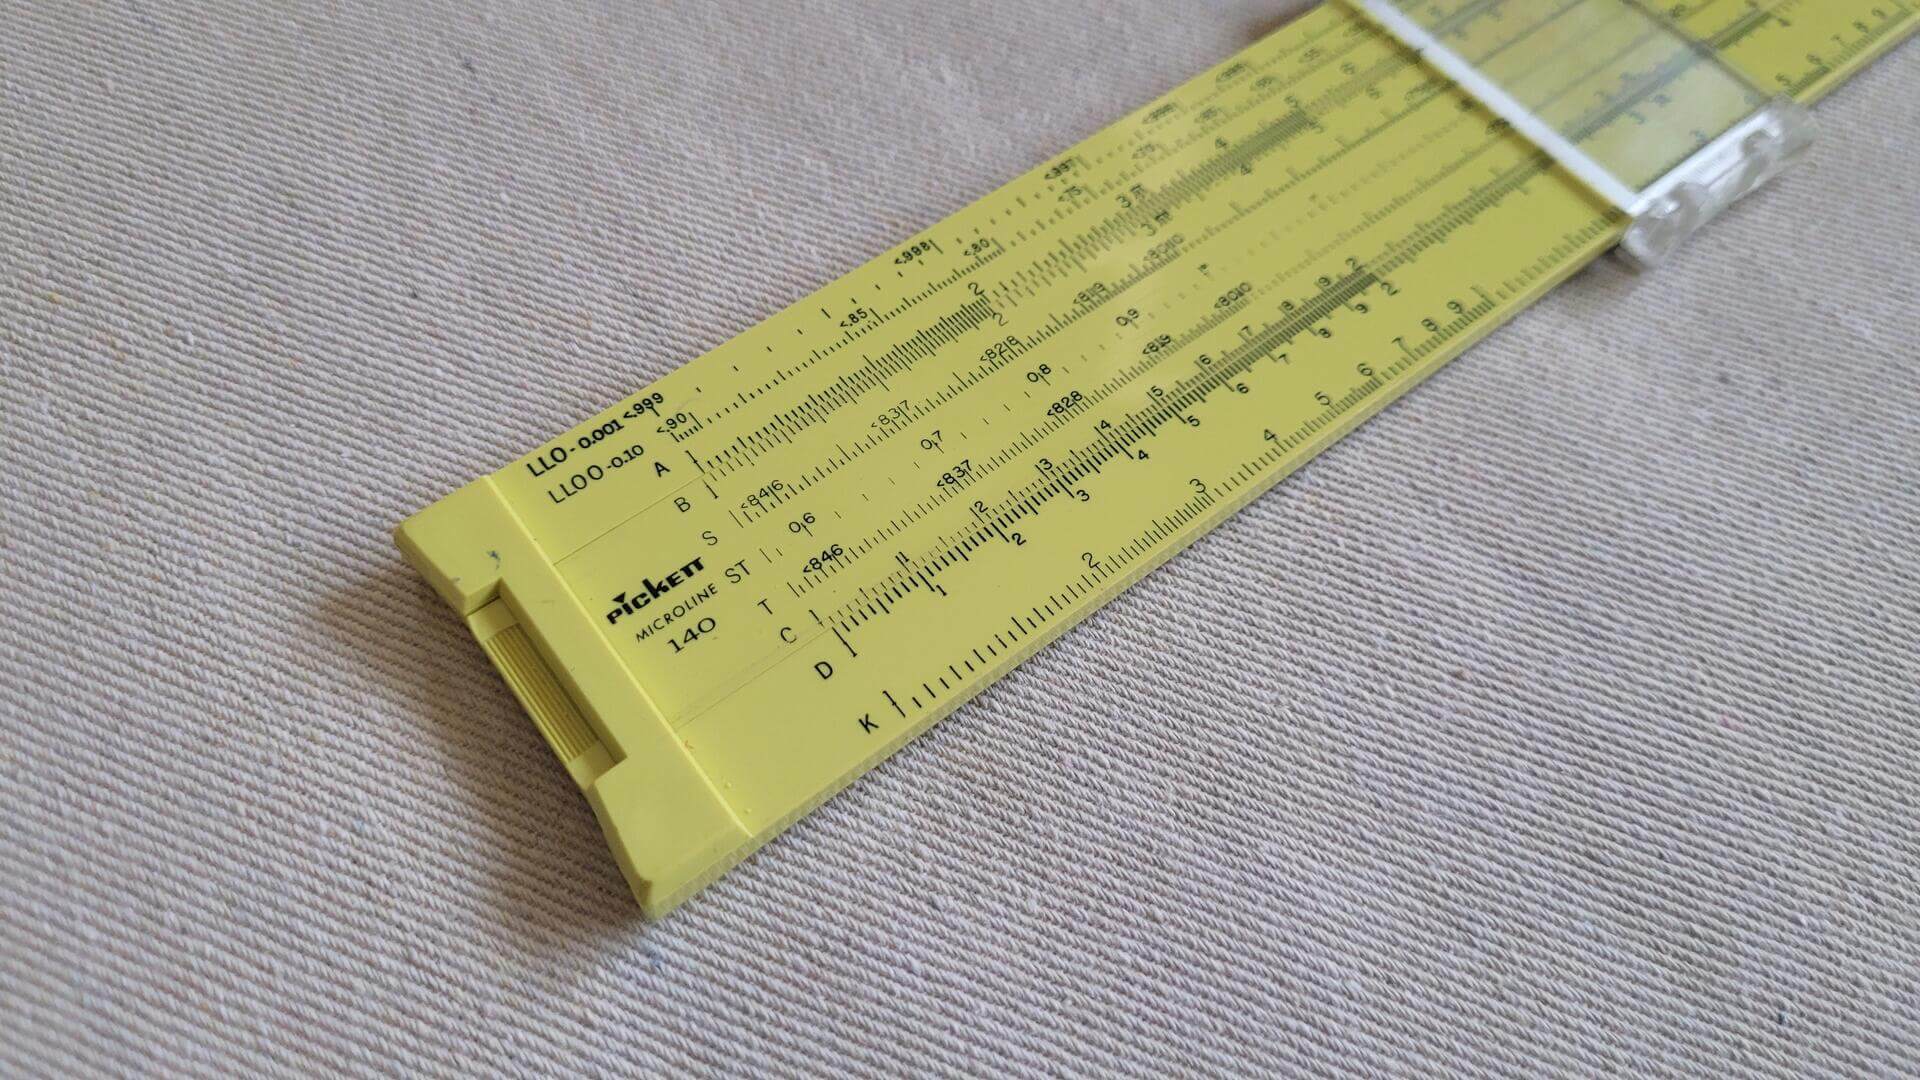 Vintage Picket Industries Microline model 140 duplex slide rule with clear indicator manufactured in Santa Barbara, CA. Mid century MCM made in USA collectible school and engineering marking and measuring tool